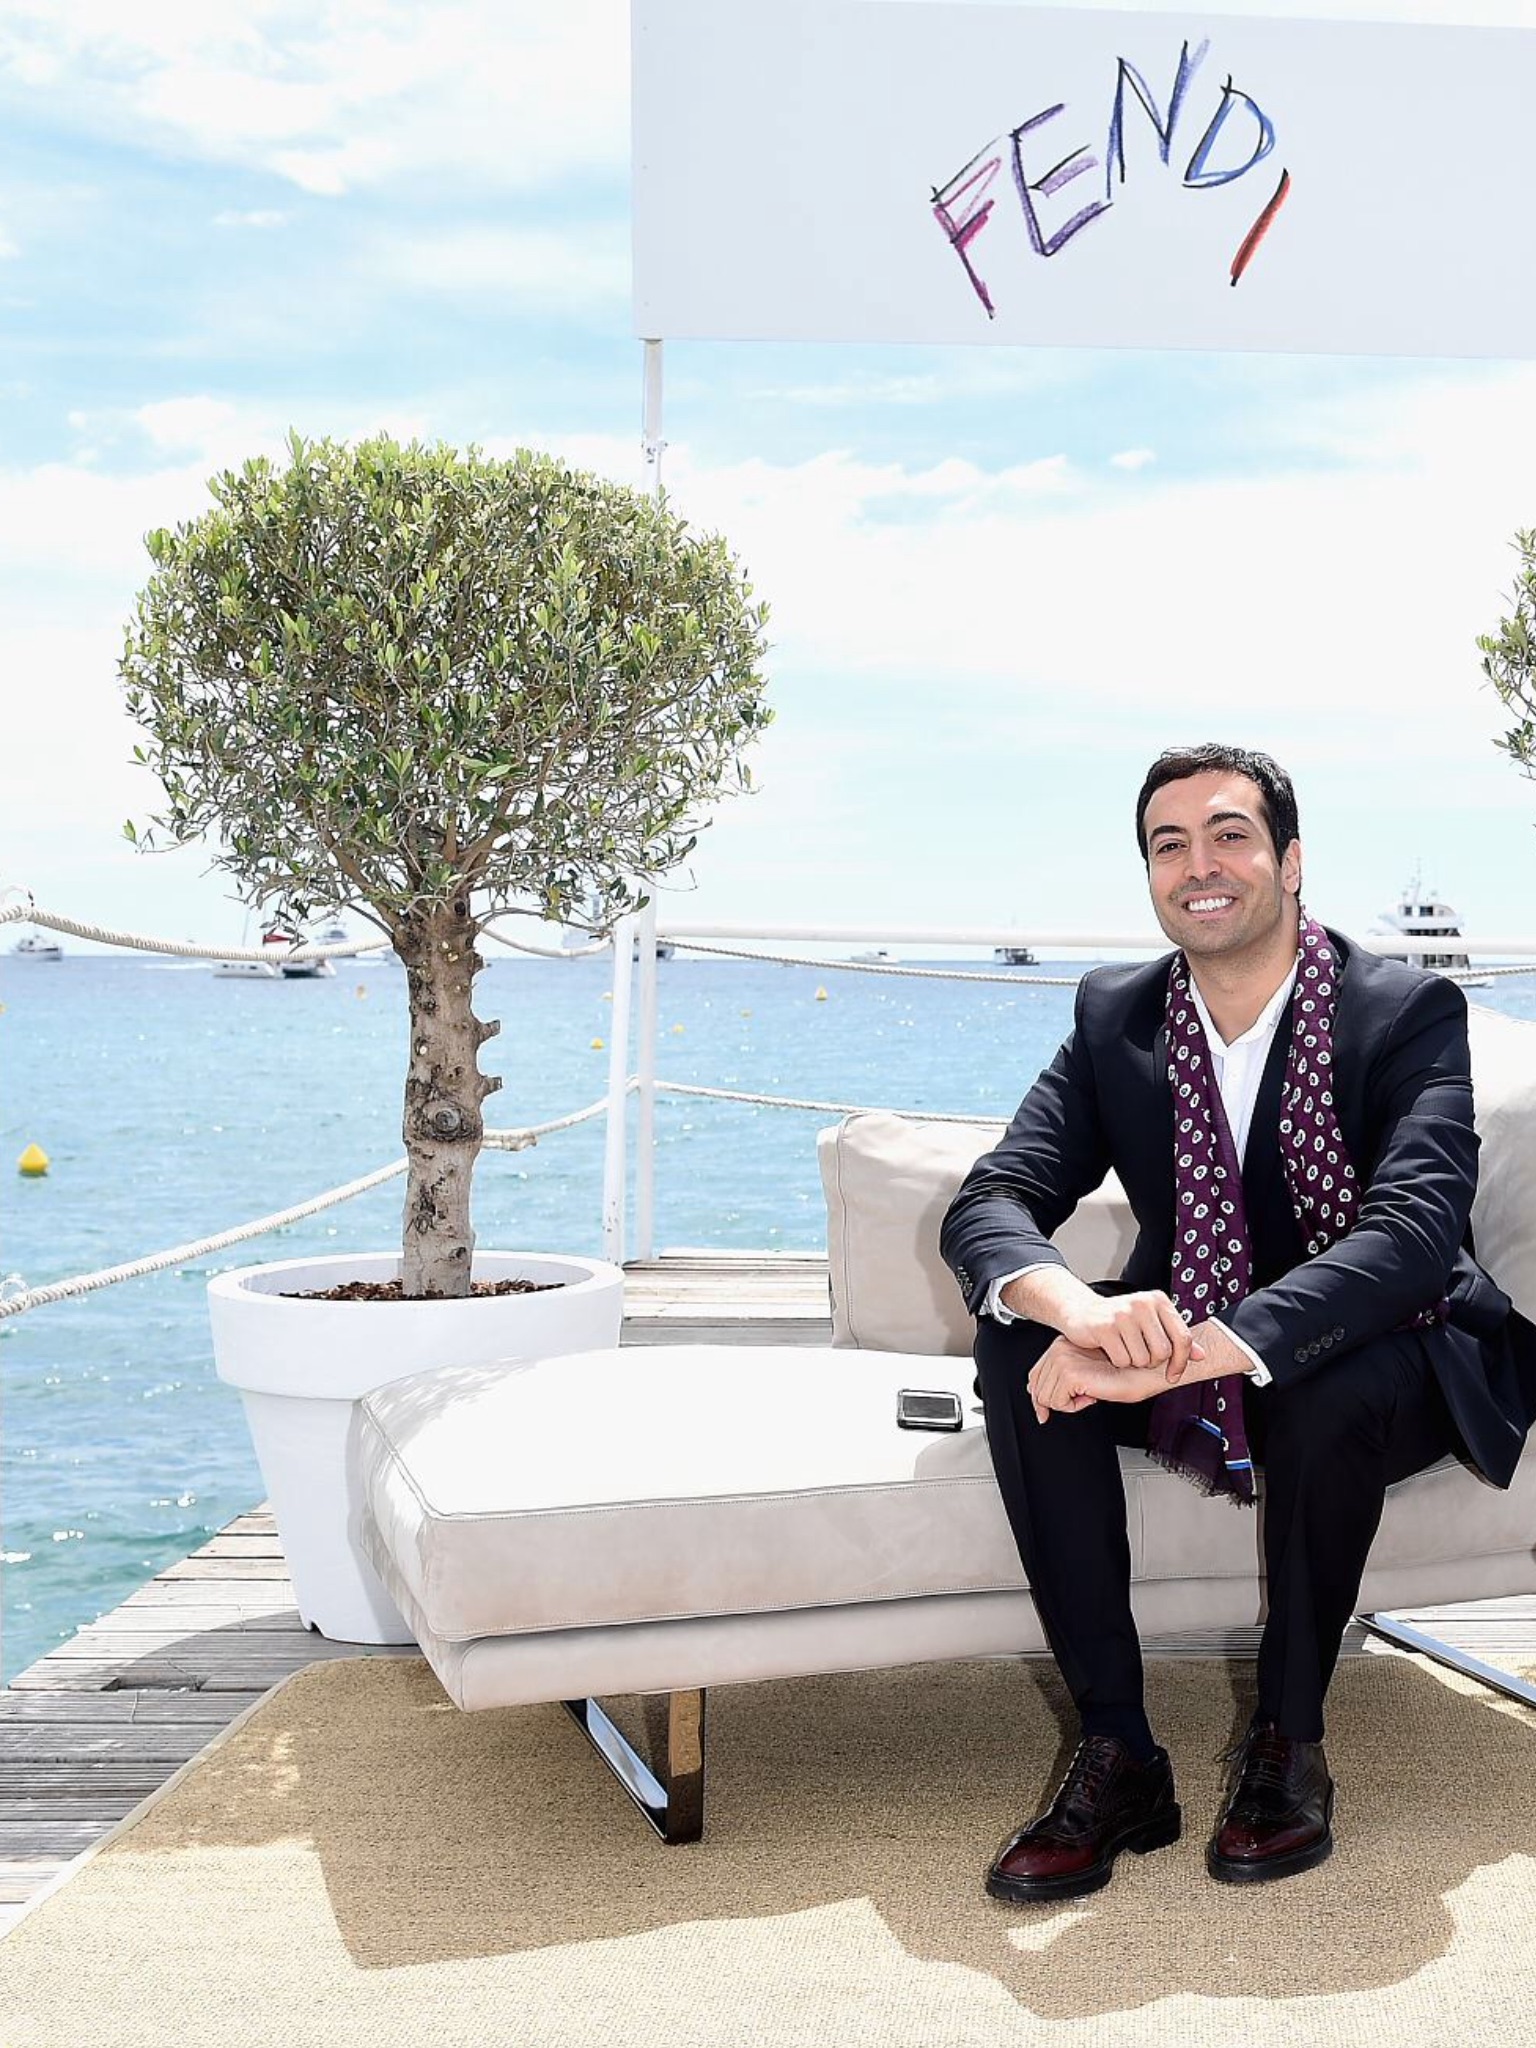 Mohammed Al Turki attends the launch of the new 'Fendi By Karl Lagerfeld' Book during the 68th annual Cannes Film Festival on May 21, 2015 in Cannes, France.